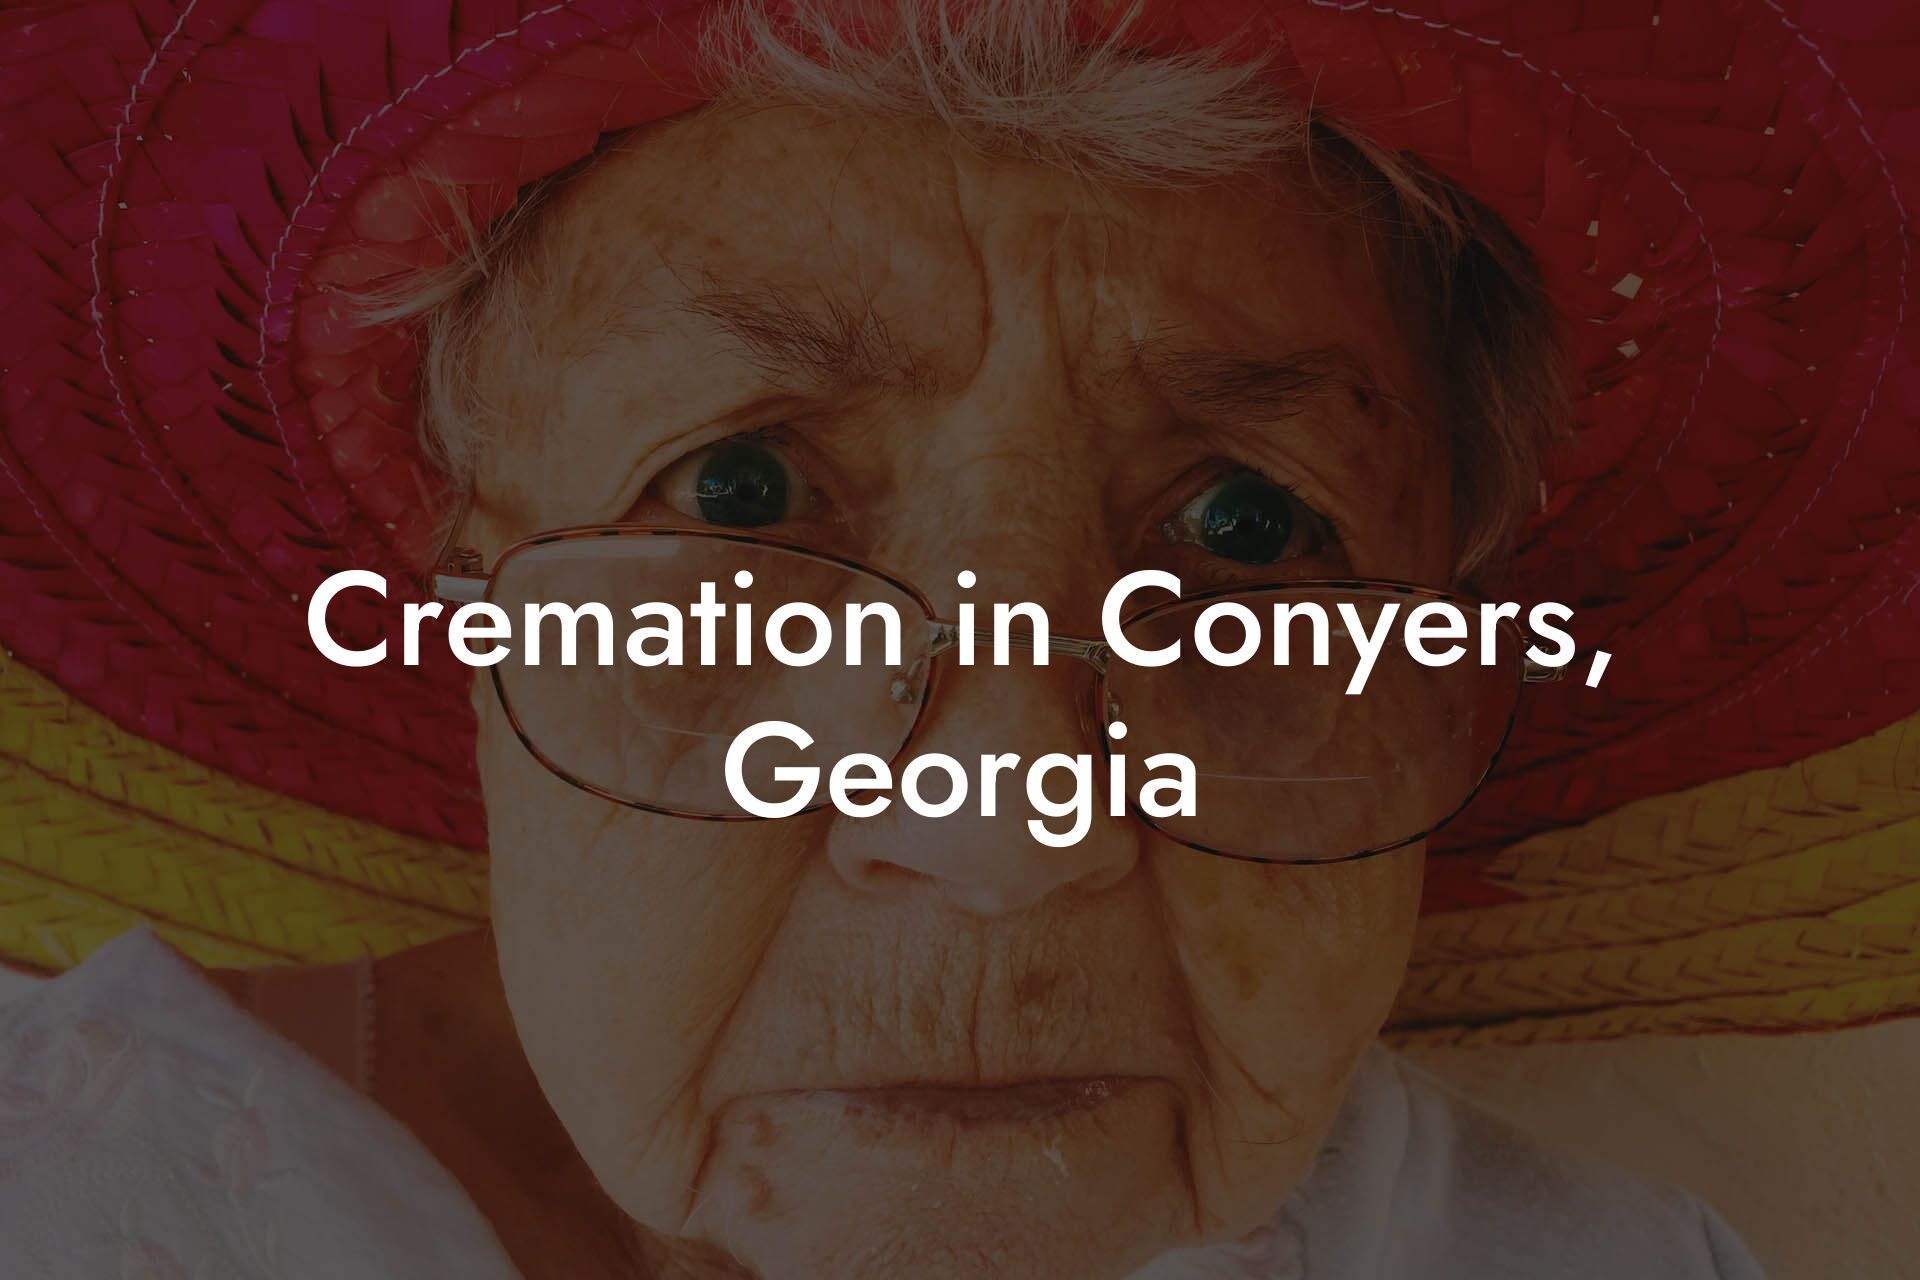 Cremation in Conyers, Georgia